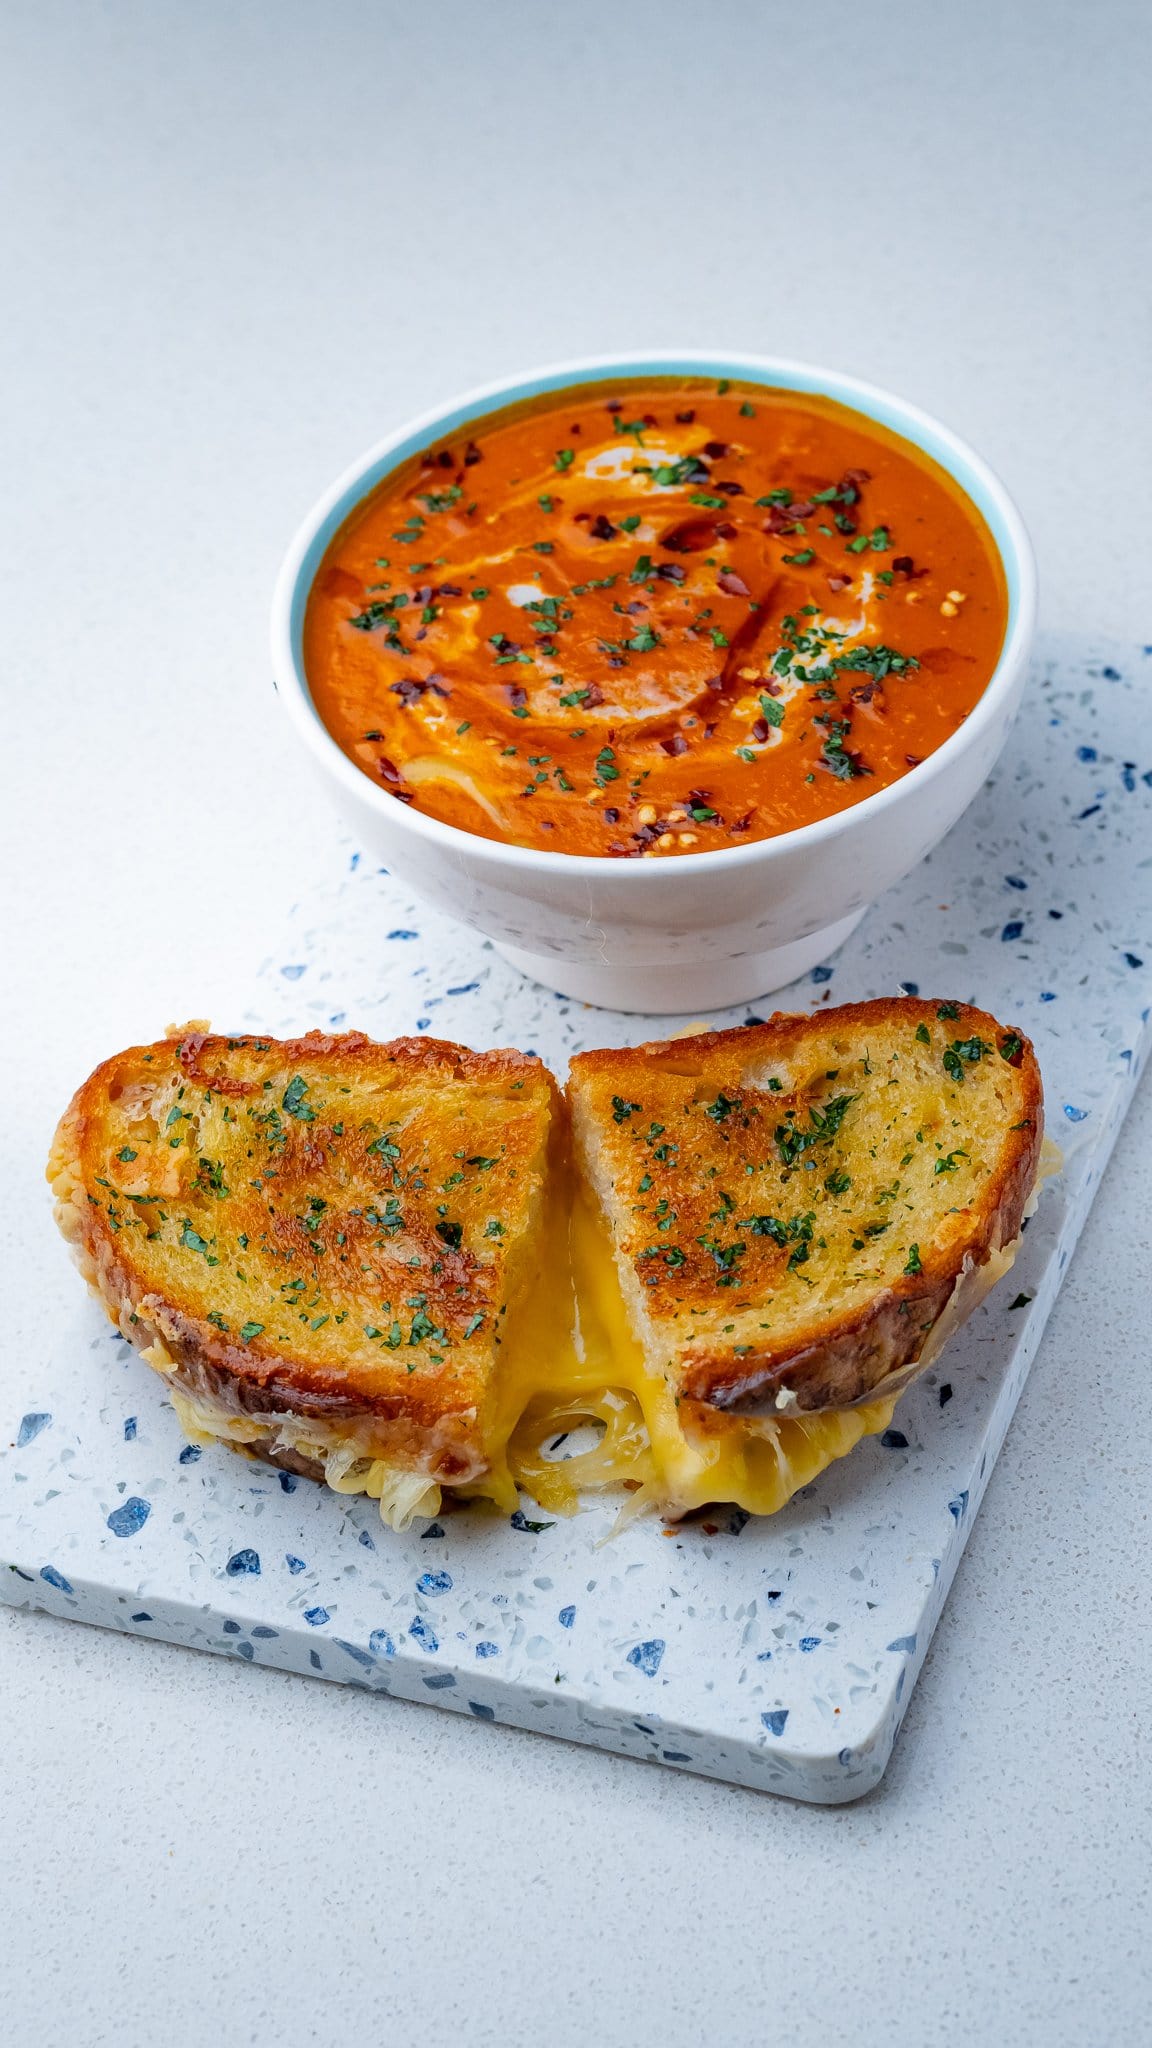 Homemade Grilled Cheese Sandwich with Creamy Tomato Soup